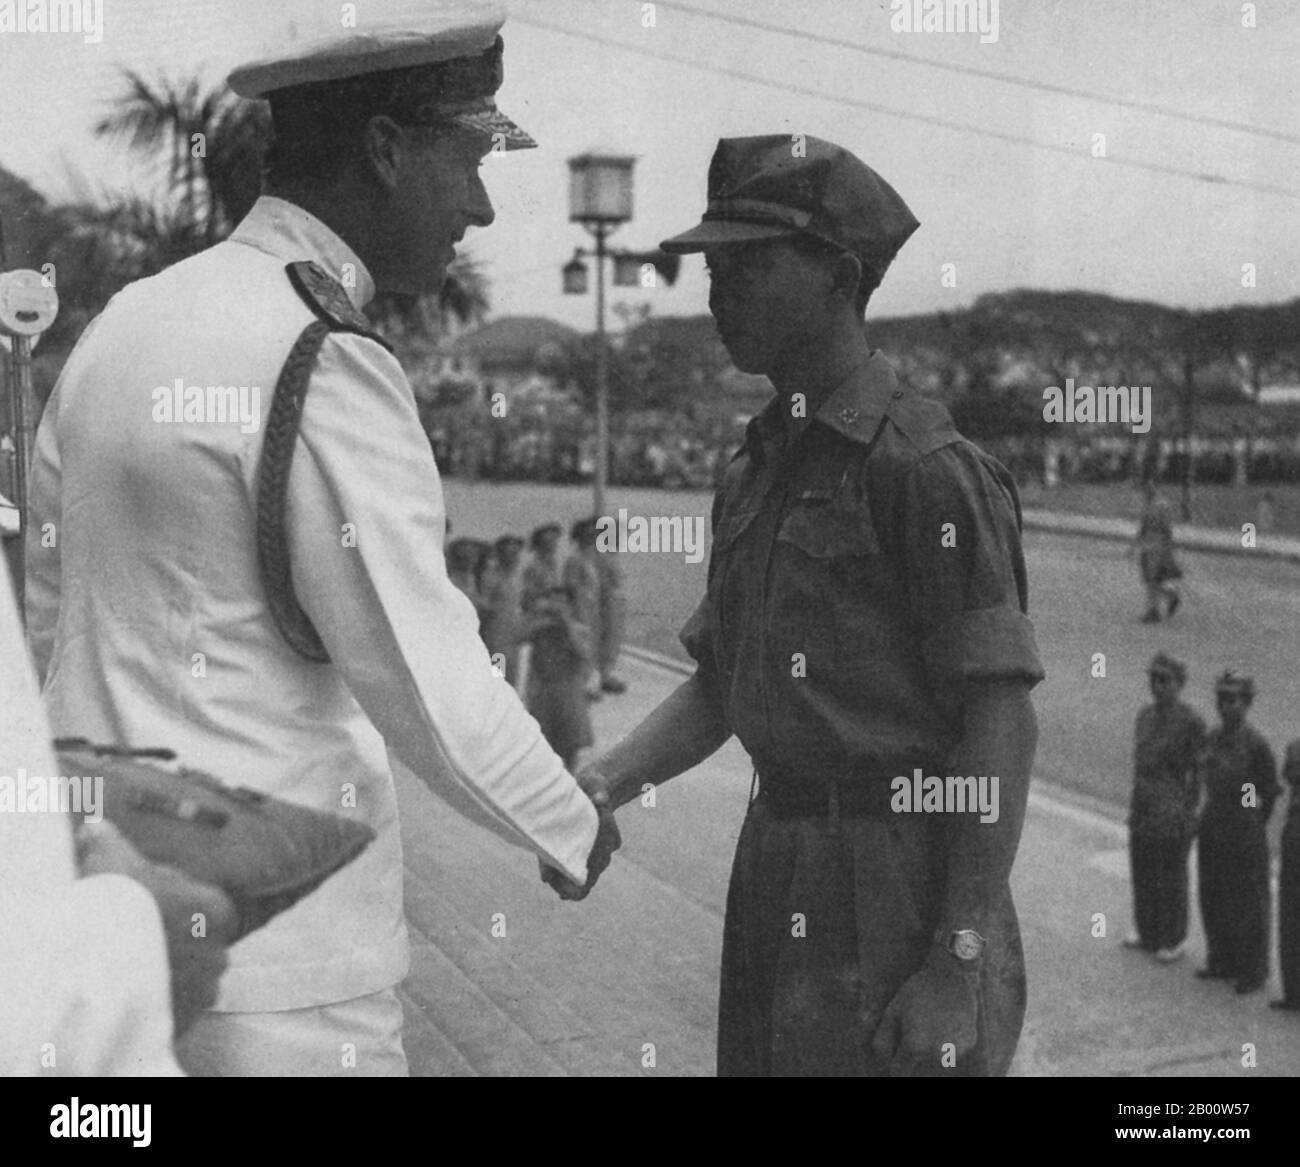 Malaysia: Admiral Lord Louis Mountbatten congratulates Chin Peng of the Malayan People's Anti-Japanese Army in Singapore, 1945.   Chin Peng (born 1924), was born Ong Boon Hua (Mandarin: Wang Yonghua or Wang Wenhua) in Sitiawan, and was a long-time leader of the Malayan Communist Party (MCP). A determined anti-colonialist, he was noted for leading the party's guerrilla insurgency in the Malayan Emergency and beyond. Stock Photo